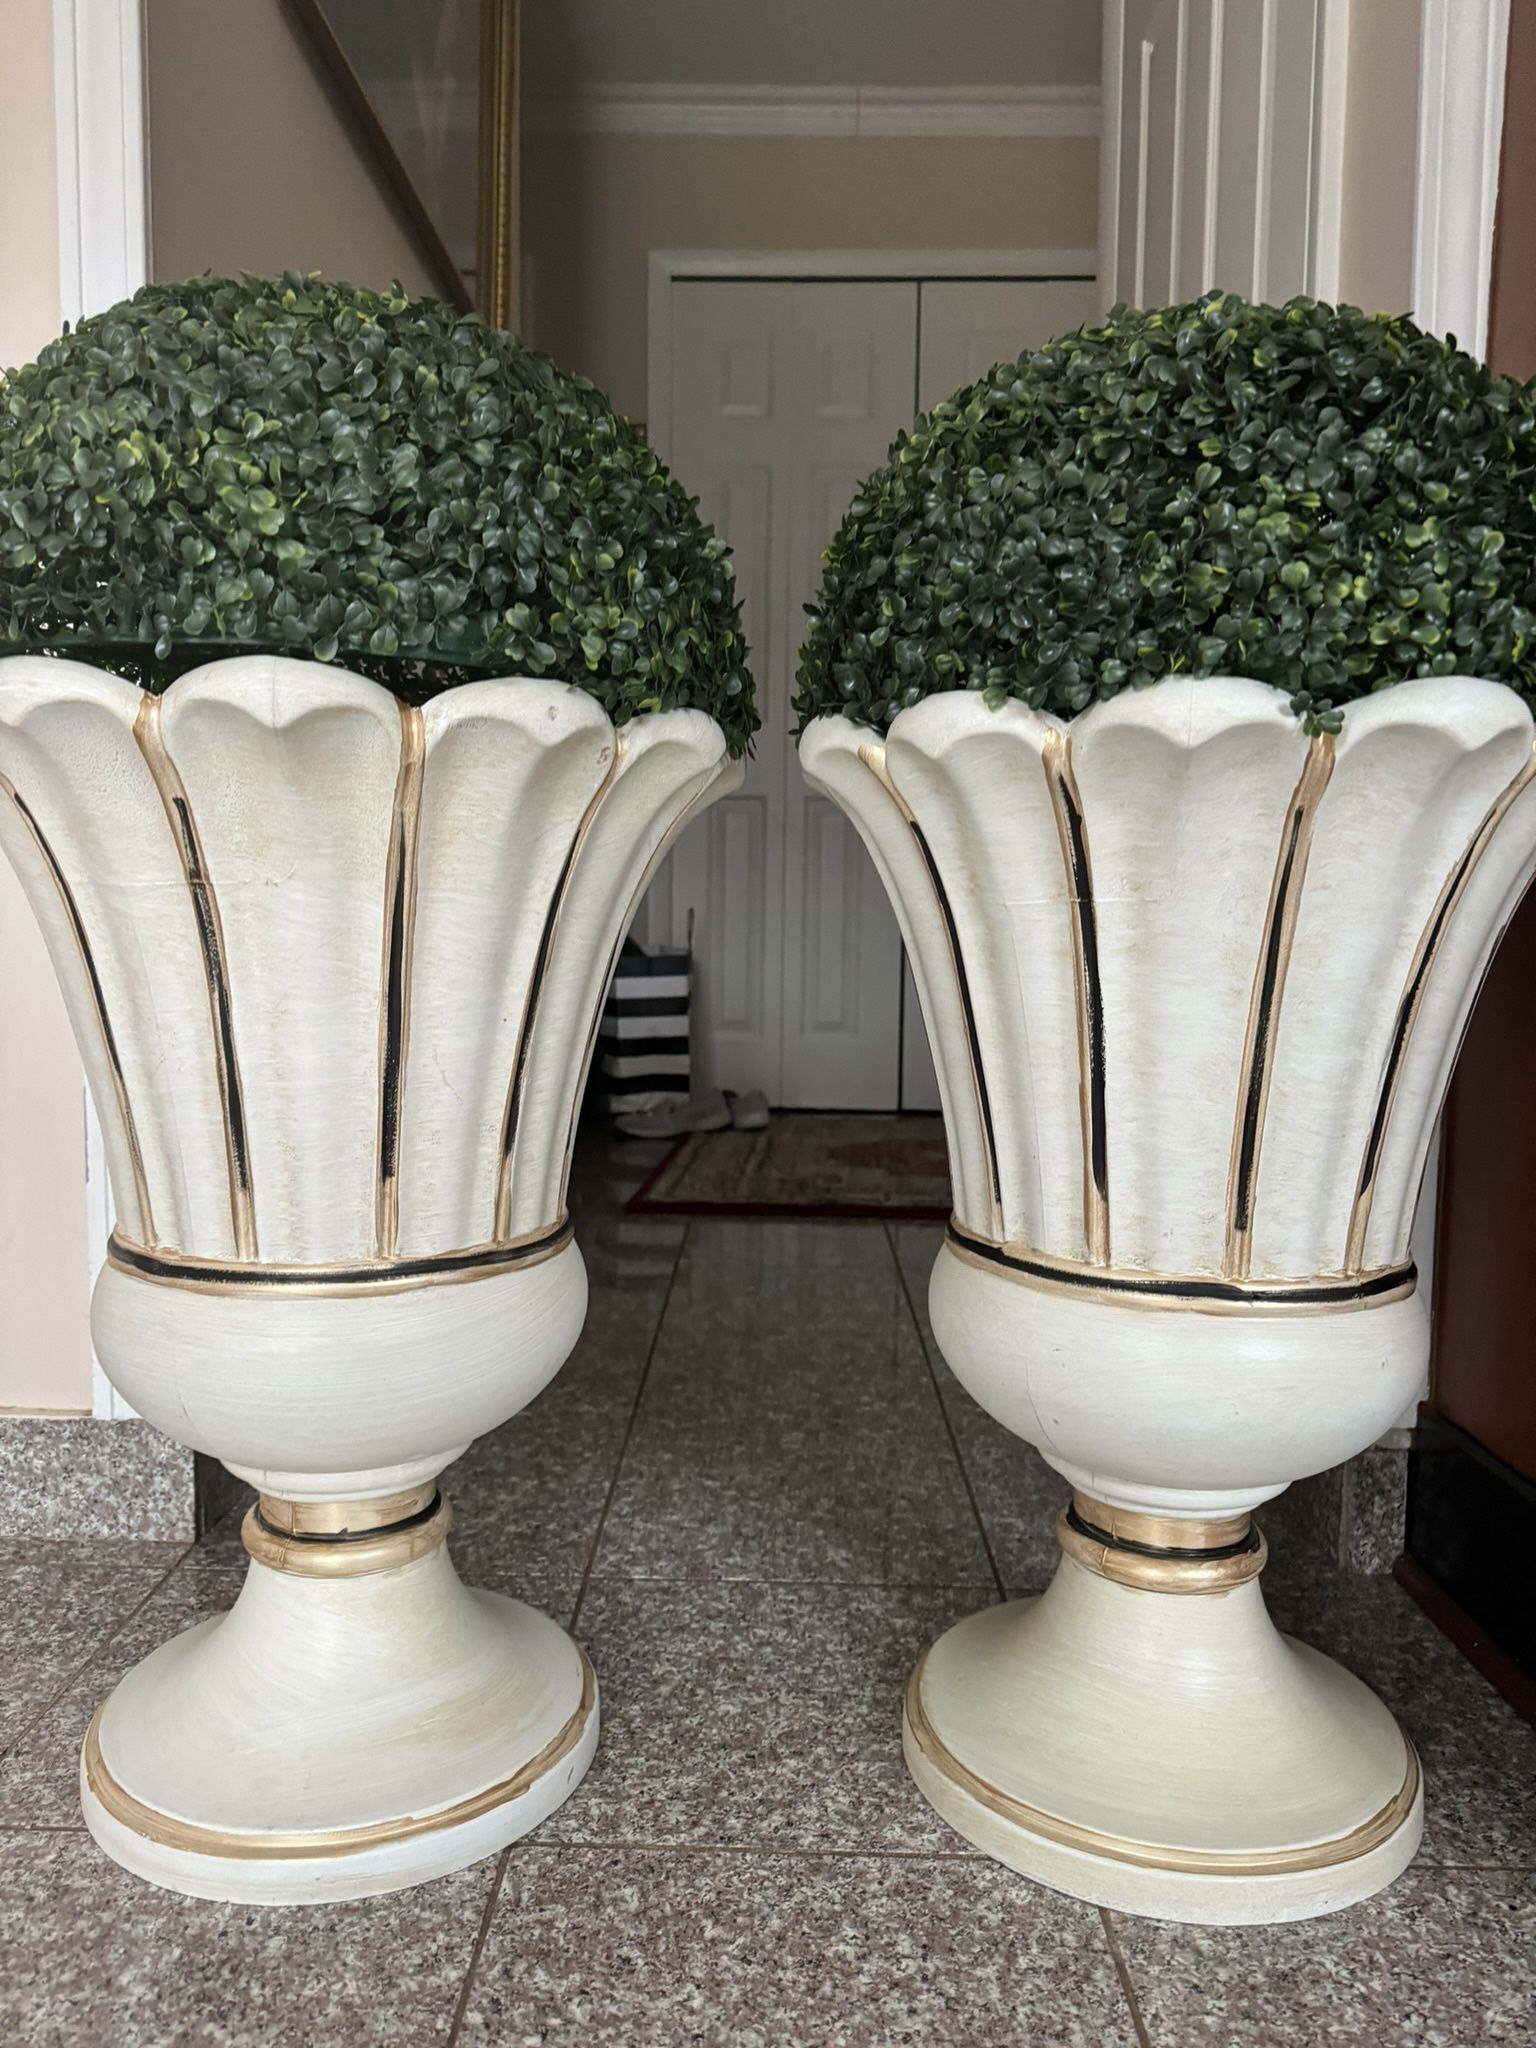 Very beautiful, indoor and outdoor artificial plant with the nice vases for both